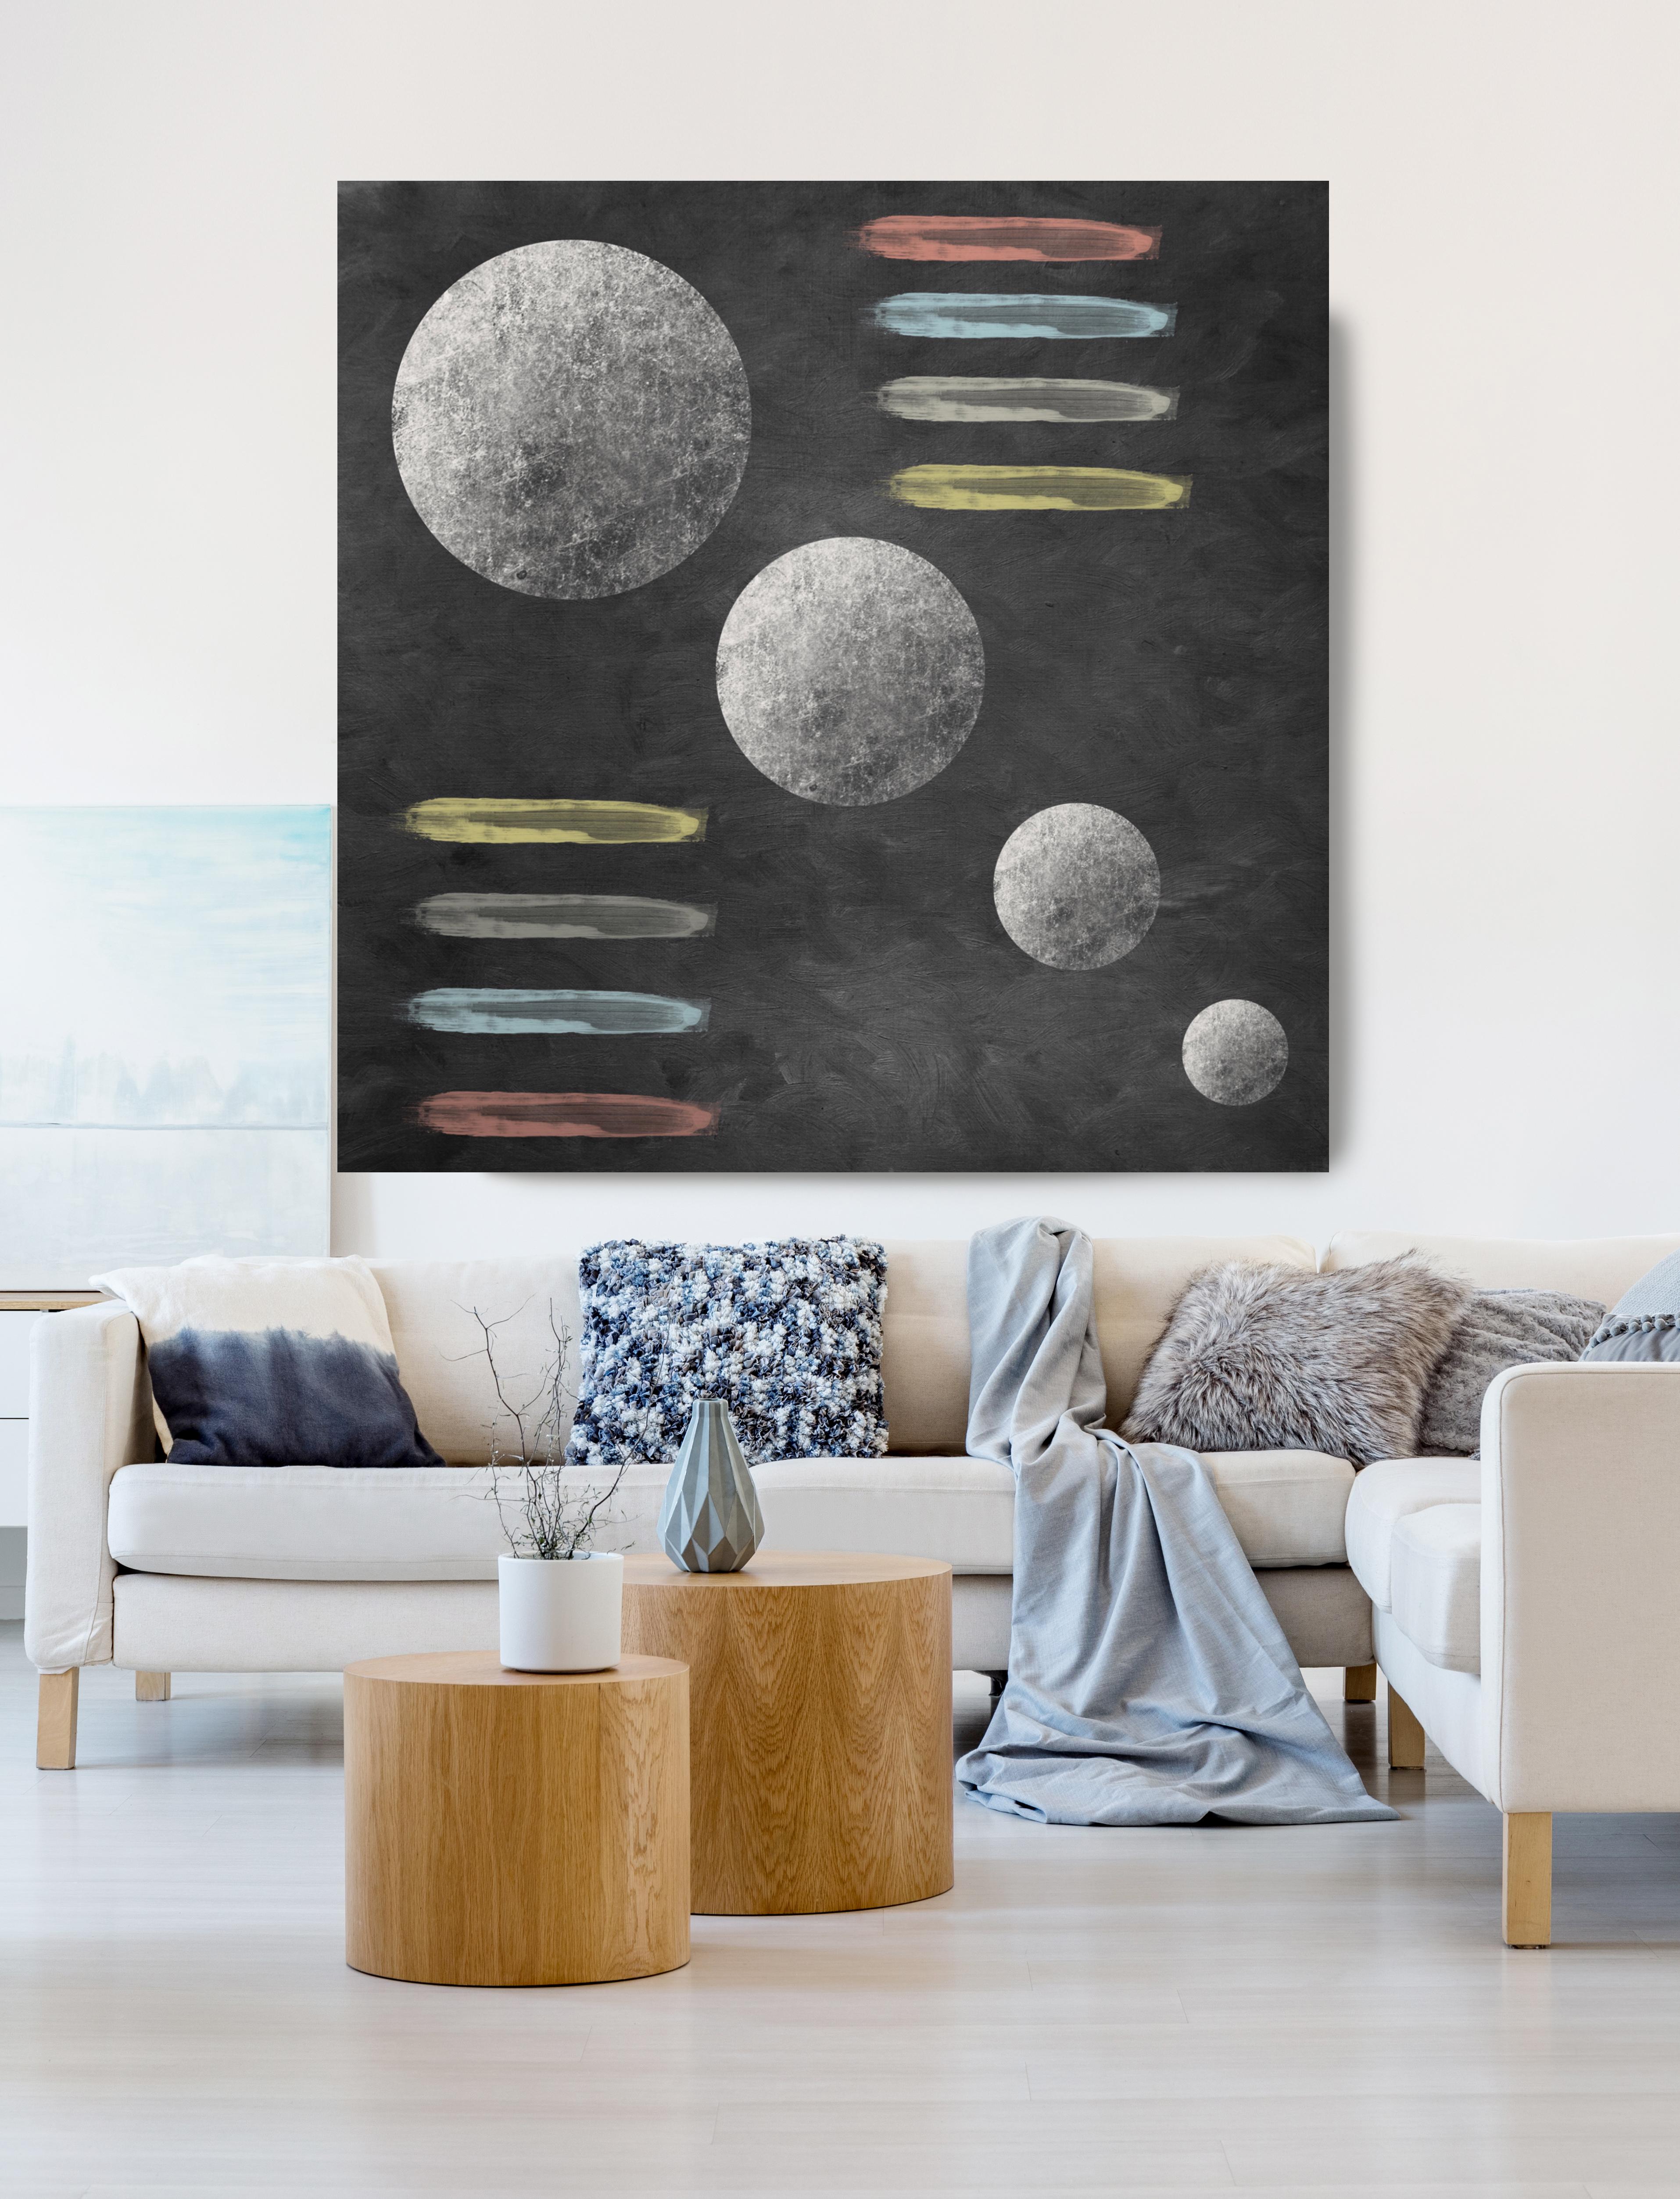 Geometric MOON 15 Black Painting Embellished Giclee On Canvas 45 x 45"  - Mixed Media Art by Irena Orlov